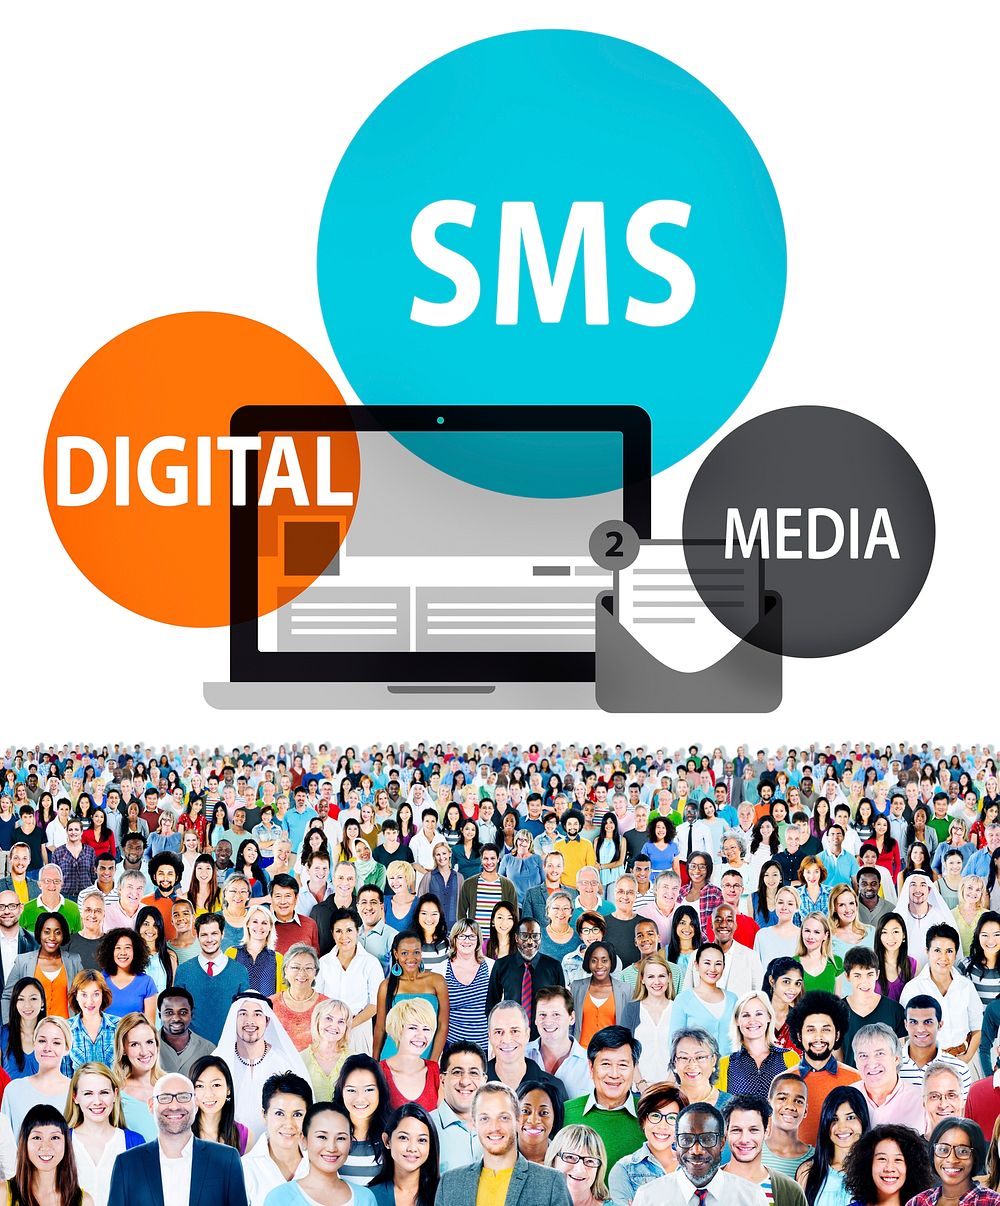 SMS Digital Media Message Chatting Communication Concept